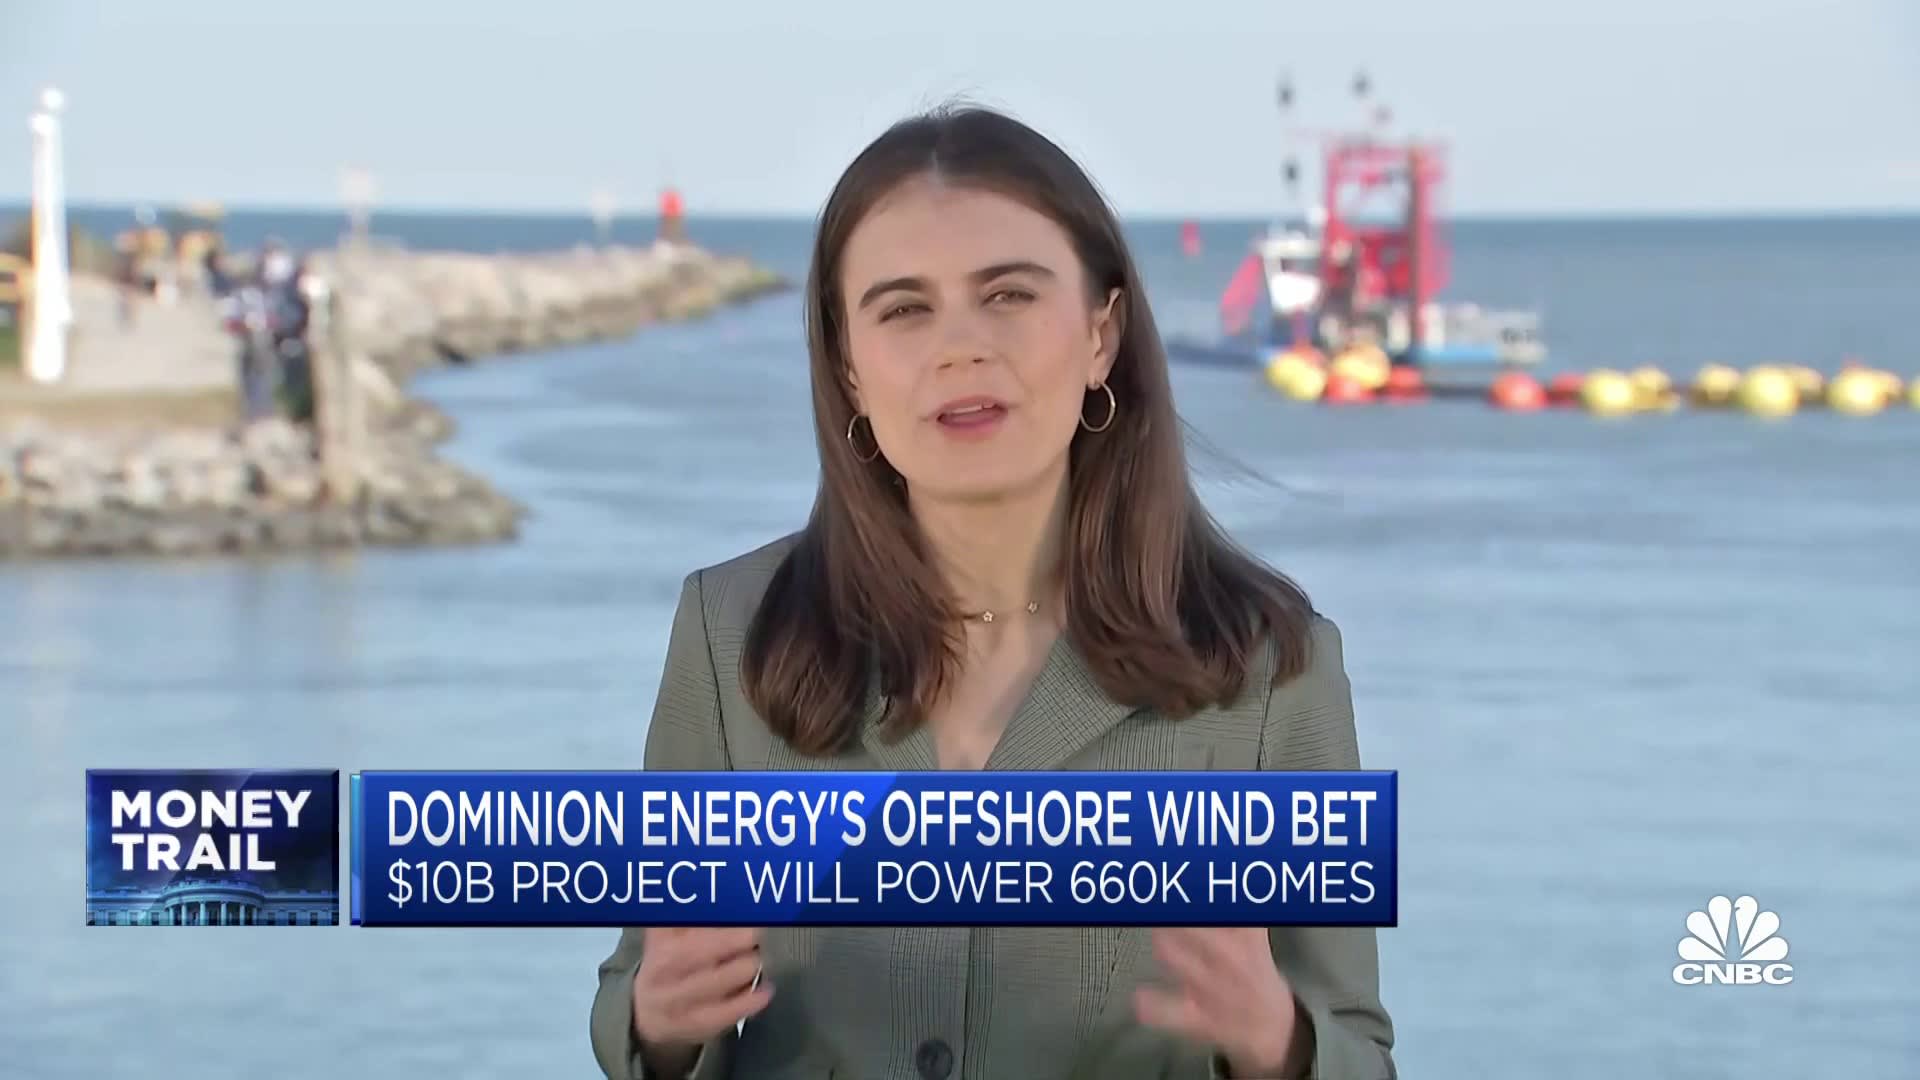 Orsted cancels two New Jersey offshore wind projects, takes $4 billion writedown